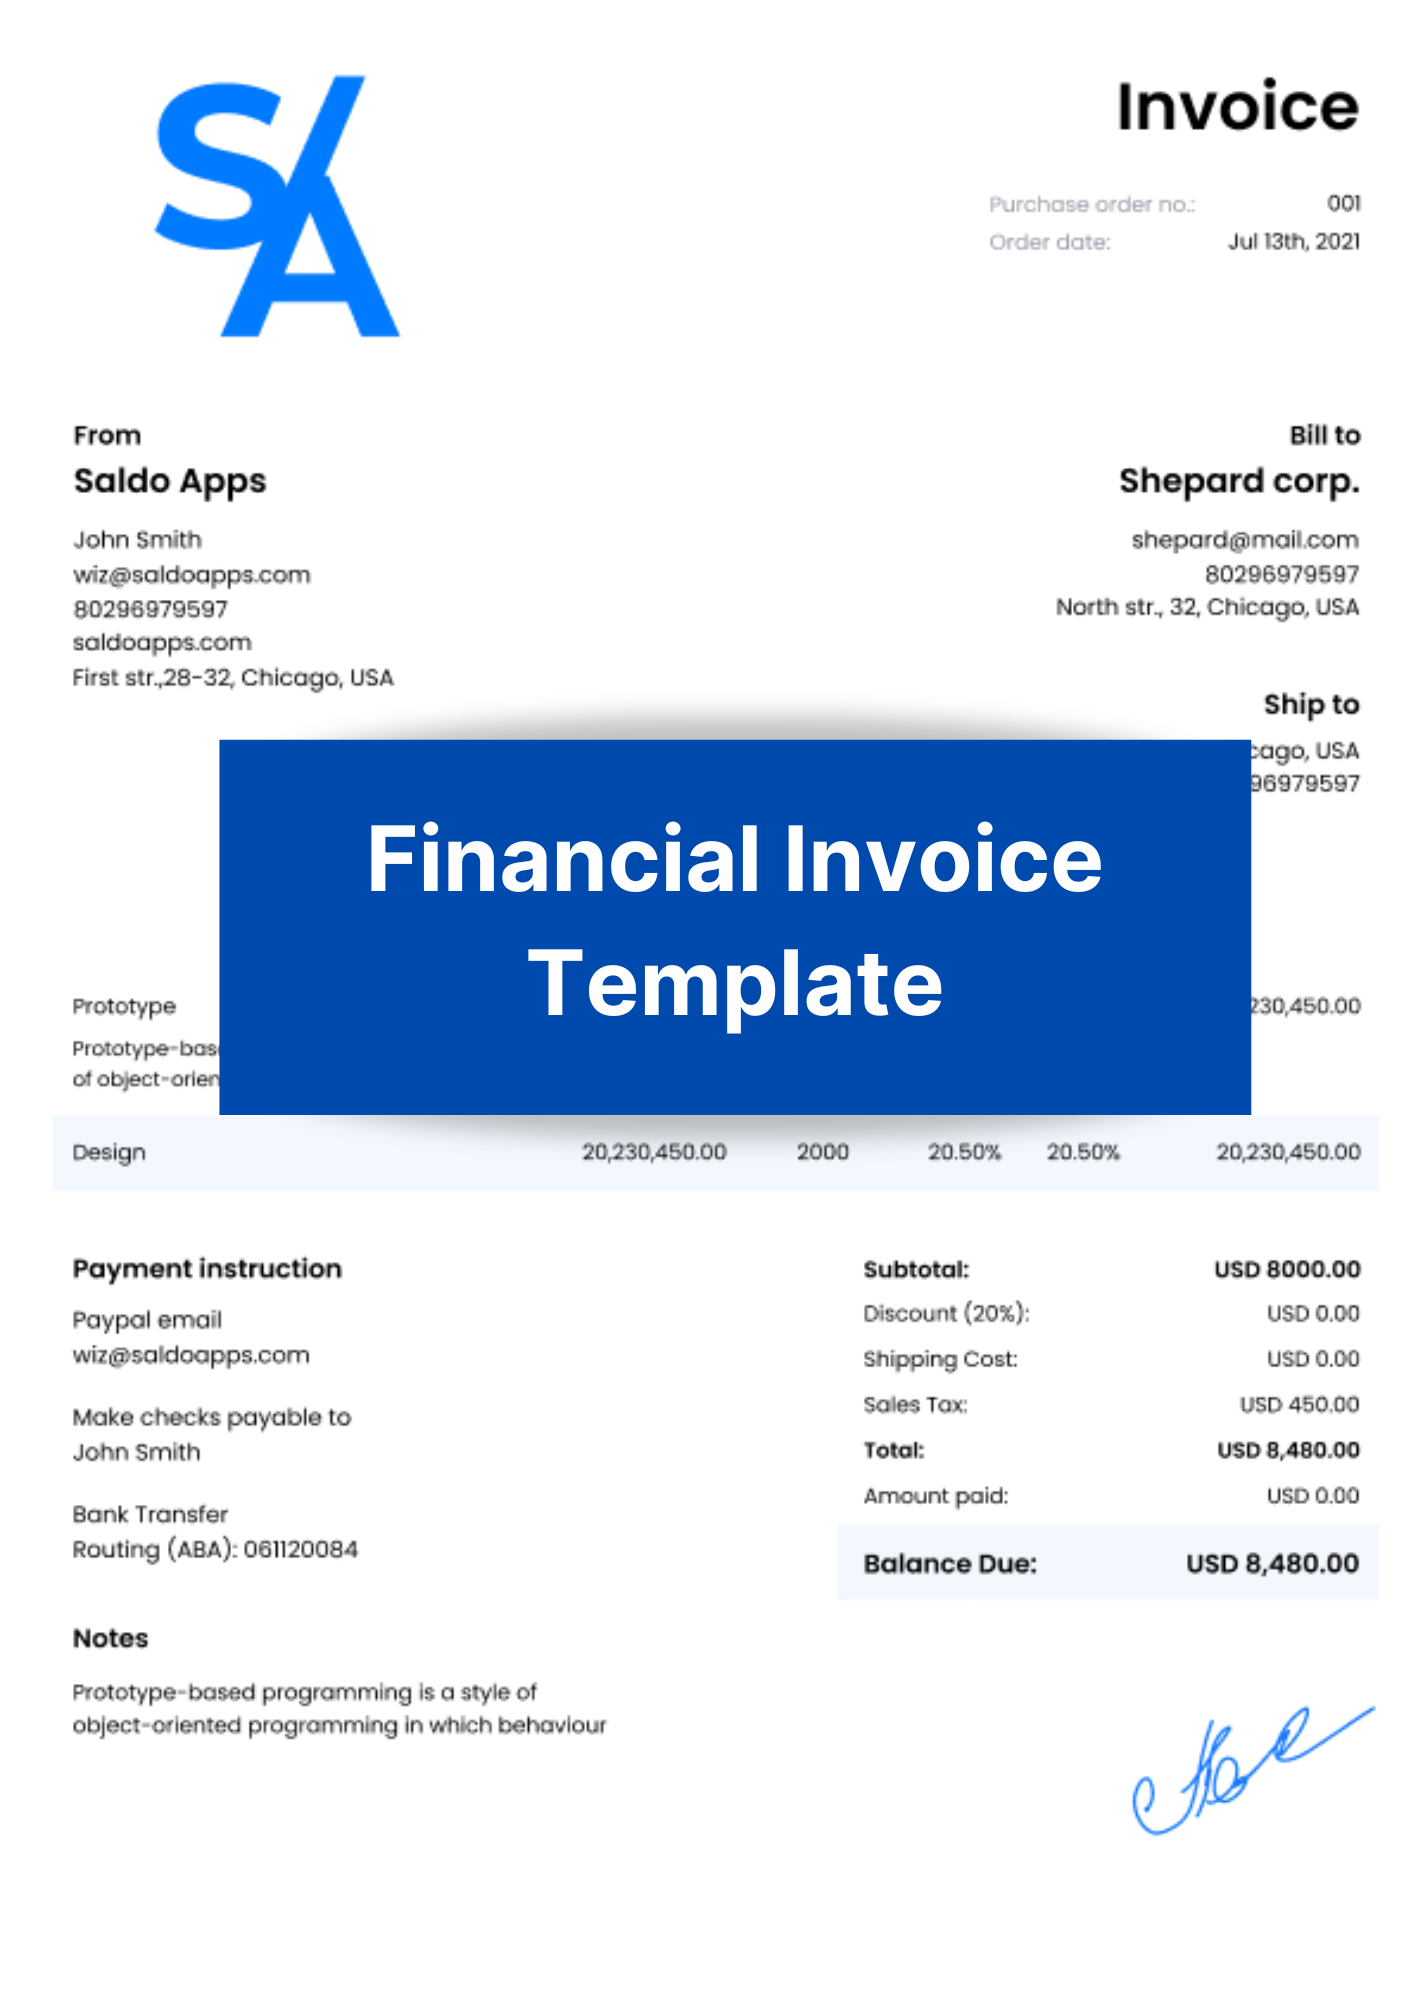 Financial Invoice Template: Download Financial Advisor Invoice Template | Saldoinvoice